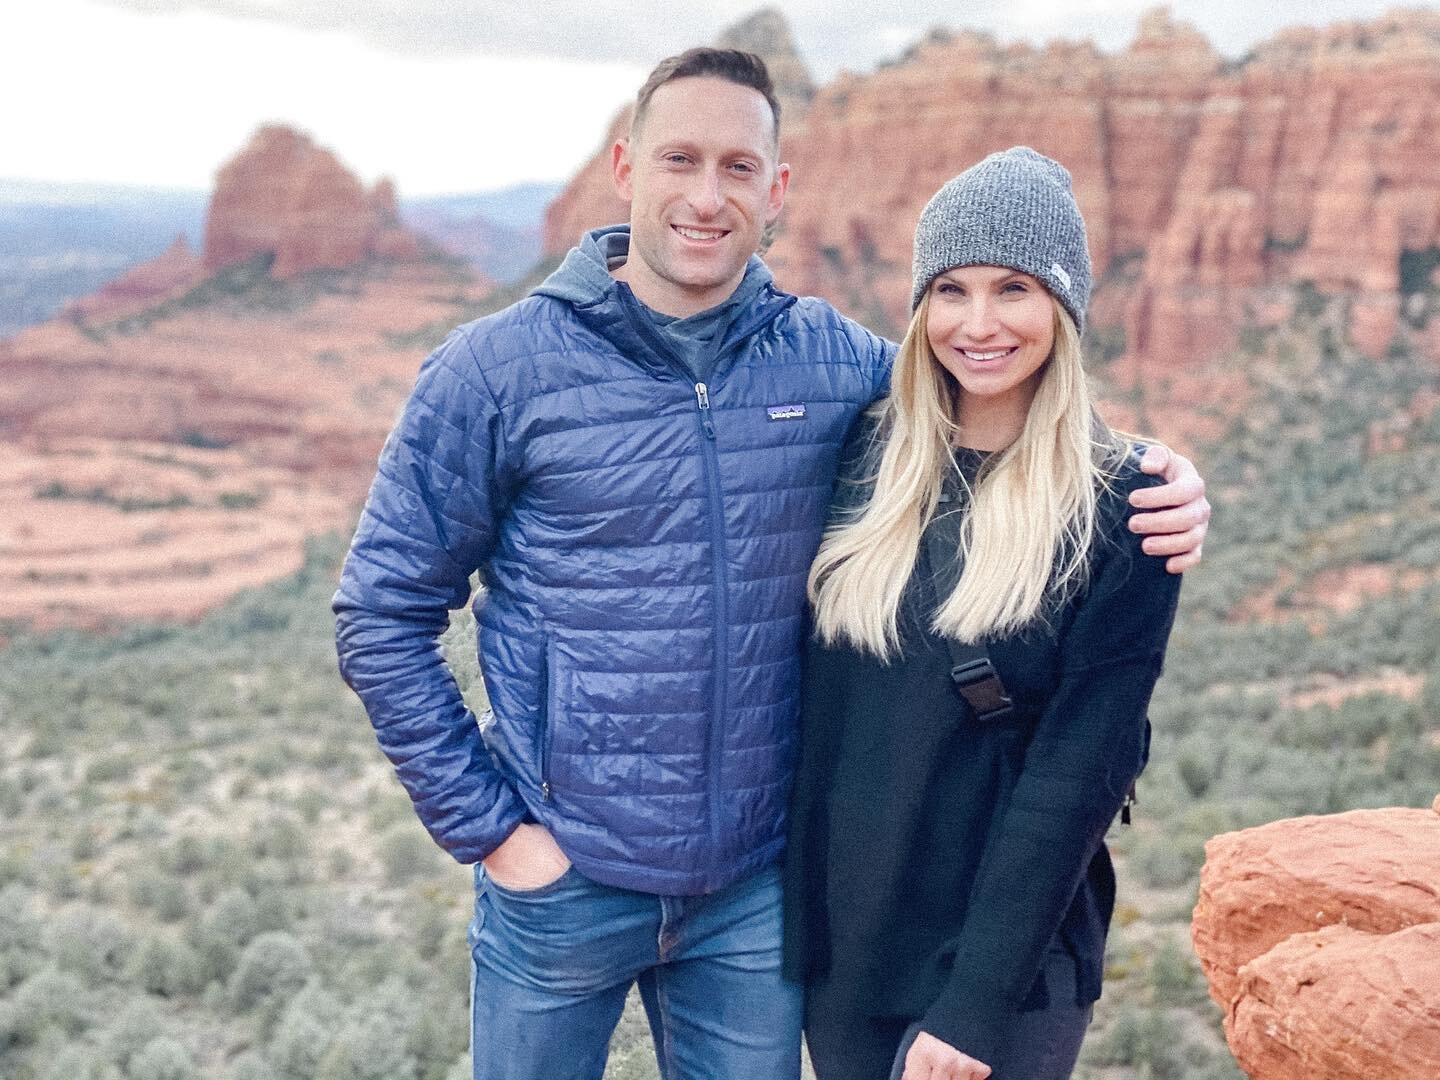 ✨ SPOTLIGHT | SEDONA ✨

our friends @bbbbbrittanyyyy and @asher_jay wanted an adventurous trip to see the majestic Red Rocks and spend some time exploring!

TRIP FAVES...
🌵a hike at Birthing Cave 
🌵dinner with incredible sunset views @mariposa_sedo